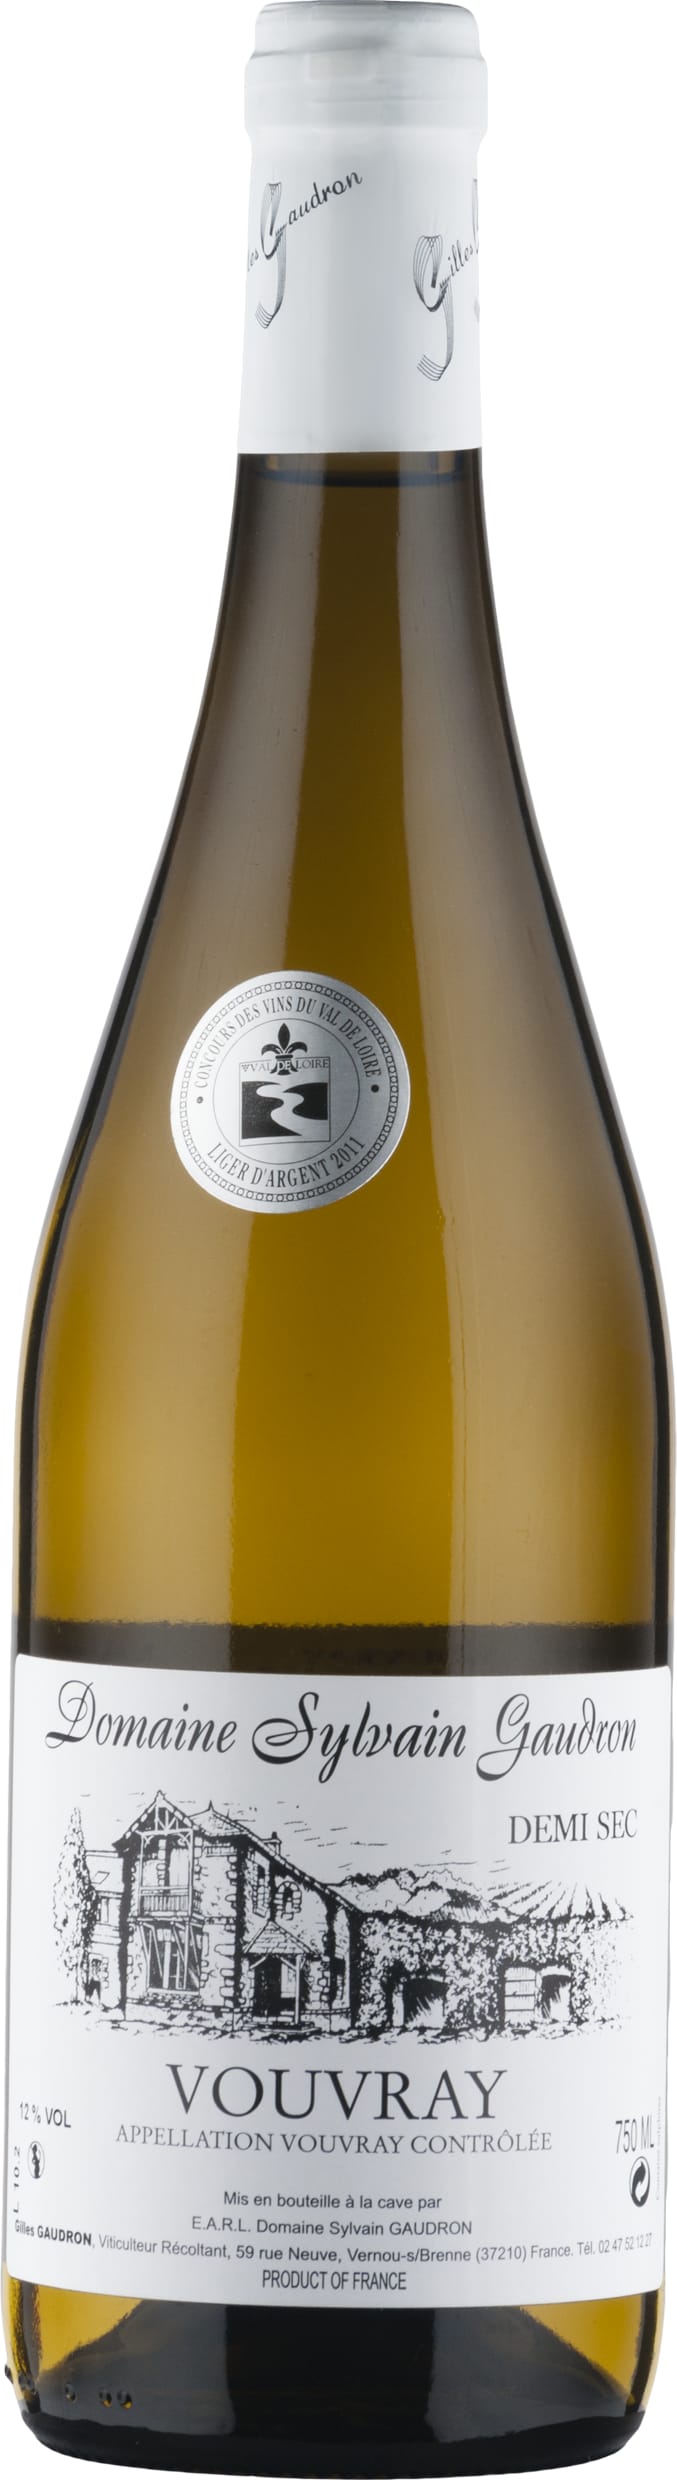 Sylvain Gaudron Vouvray Demi-Sec 2017 75cl - Buy Sylvain Gaudron Wines from GREAT WINES DIRECT wine shop